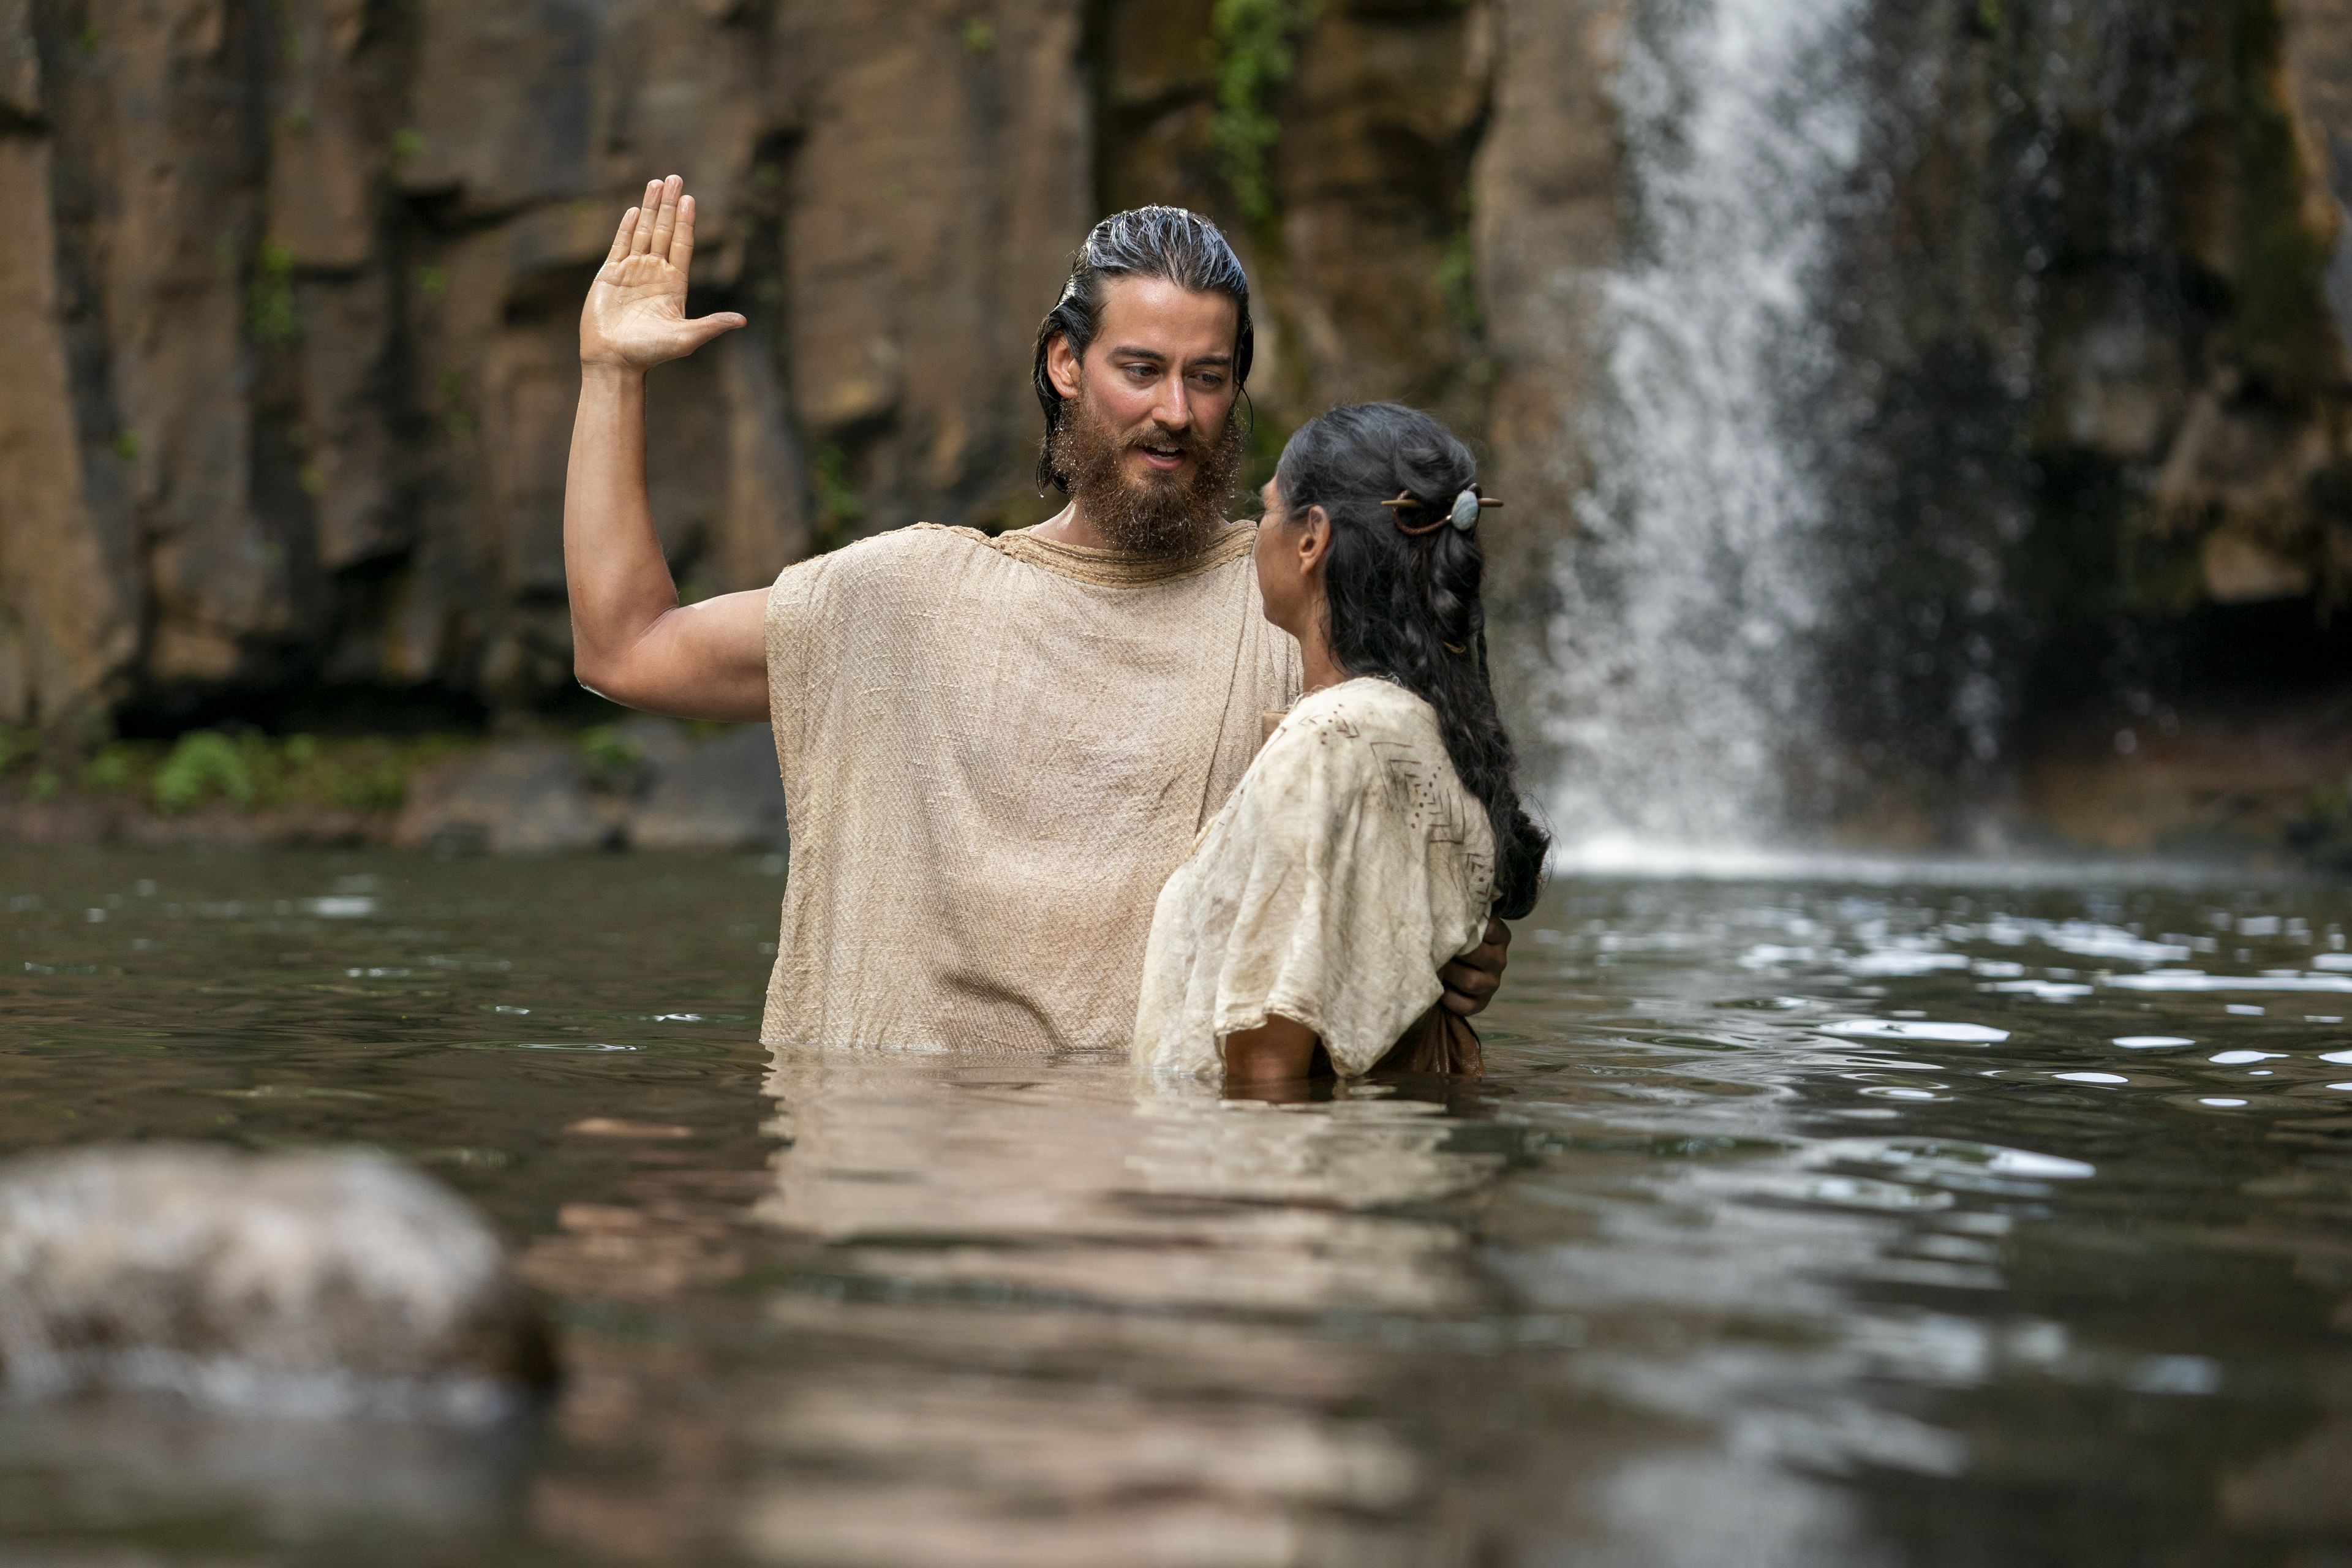 Alma baptizes people at the Waters of Mormon.